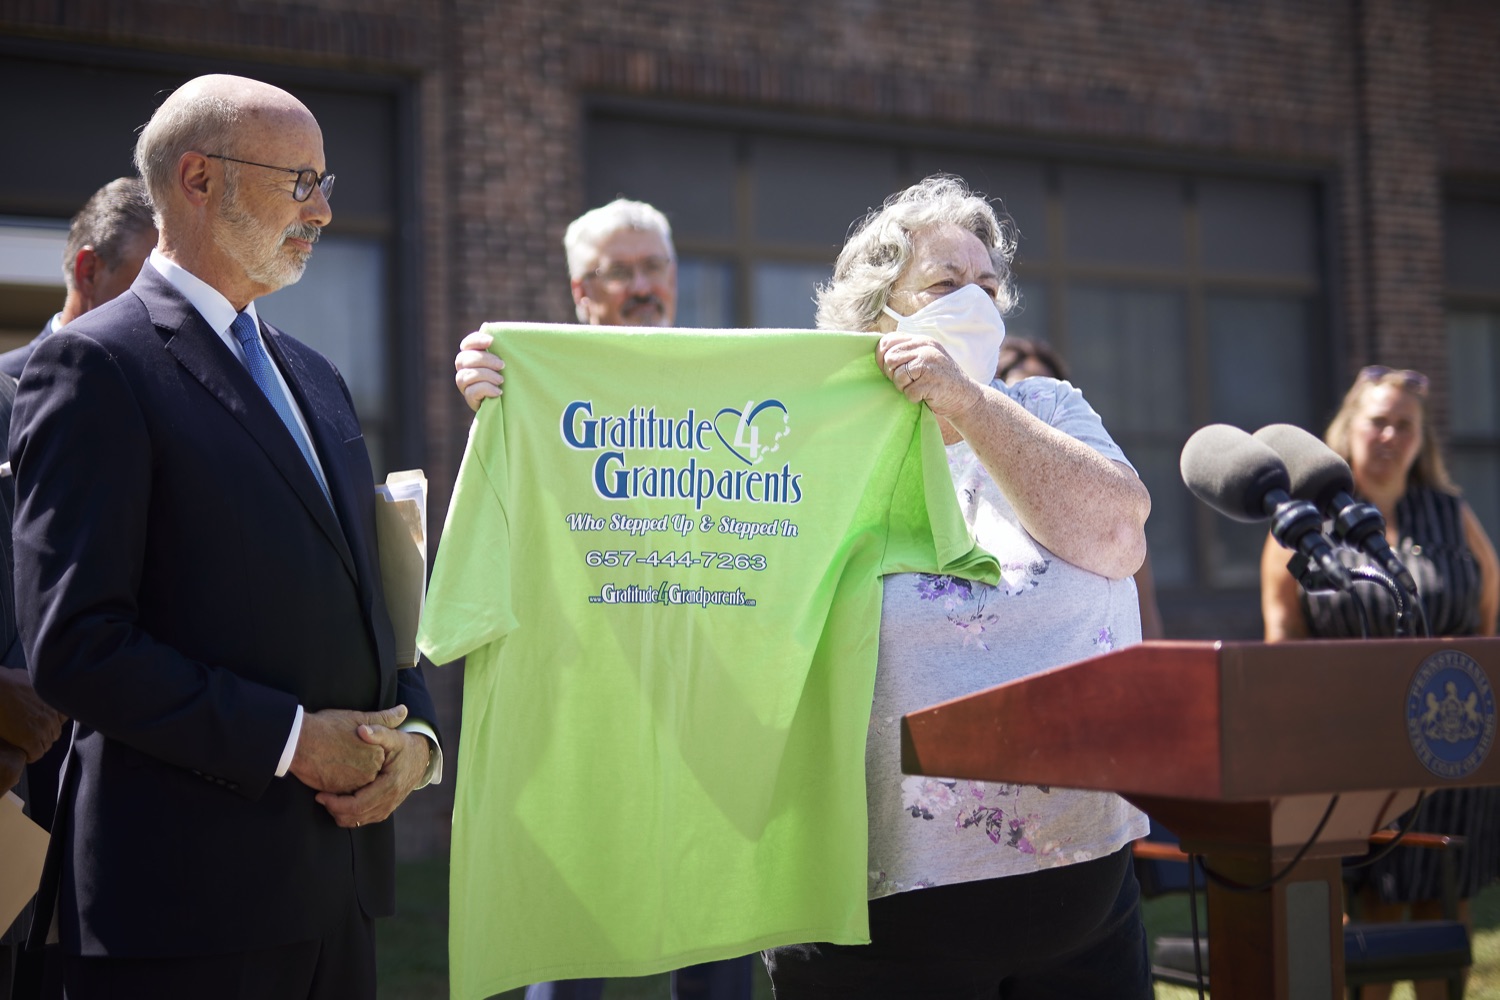 Pennsylvania Governor Tom Wolf receives a tee shirt from Angie Carr, a client of the food pantry.   Governor Tom Wolf was joined by state Representative David Delloso and stakeholders and community members to discuss the reintroduction of the PA Opportunity Program, which would send $2,000 checks directly to Pennsylvanians. I first proposed the PA Opportunity Program back in February, but Republican leaders in the General Assembly just wouldnt get on board with funding it in this years budget, said Gov. Wolf. However, as Ive traveled the commonwealth, Ive heard directly from so many people about how much this program would mean to them and their families. Im not going to stop fighting until the people of Pennsylvania get the help they need and deserve. Folcroft, PA  August 2, 2022<br><a href="https://filesource.amperwave.net/commonwealthofpa/photo/22070_gov_opportunityFund_dz_014.JPG" target="_blank">⇣ Download Photo</a>